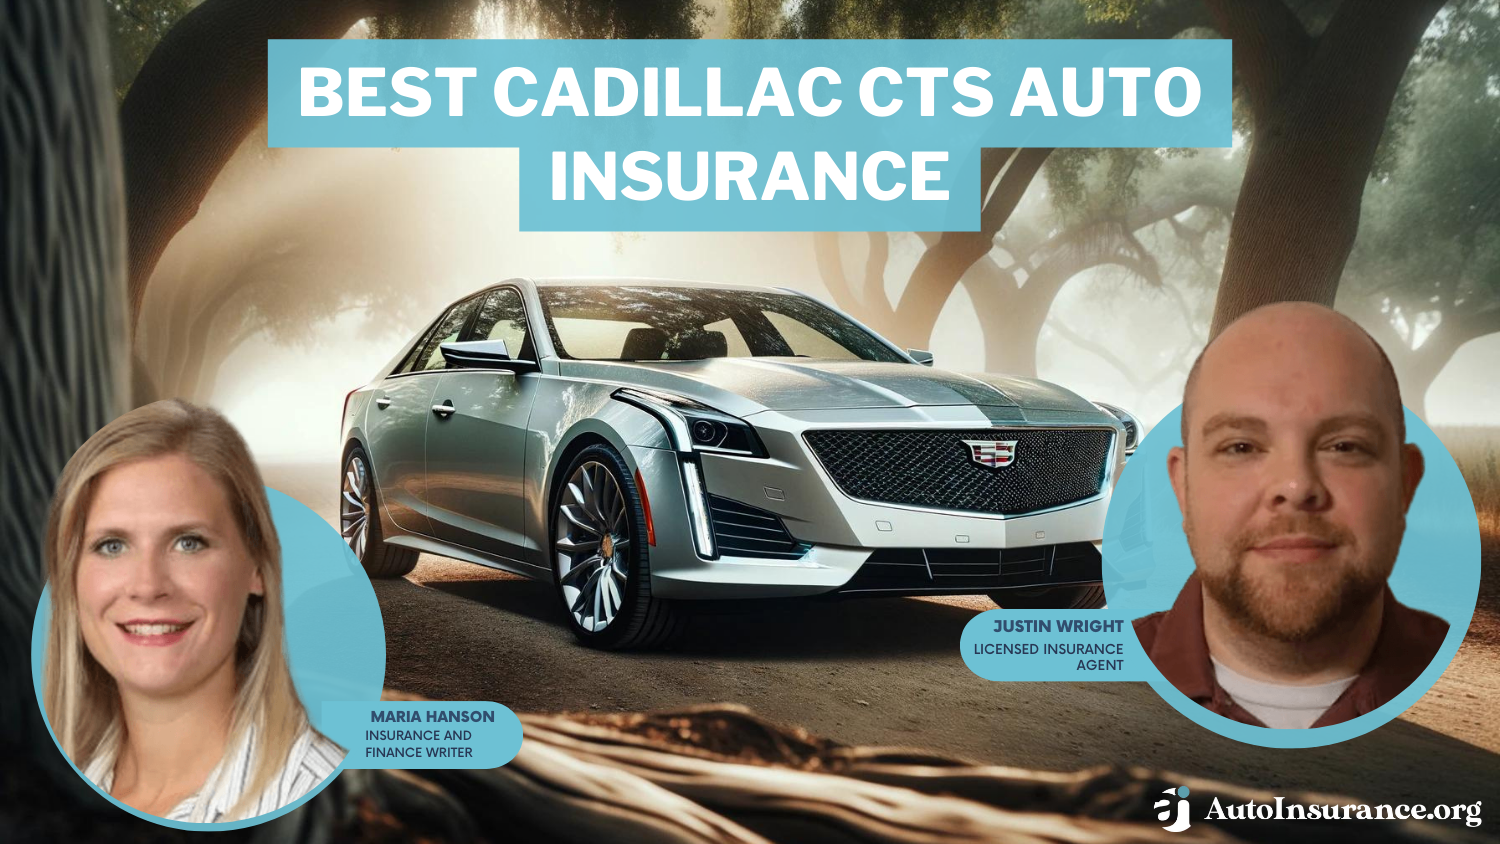 Best Cadillac CTS Auto Insurance: Amica, Nationwide, Geico